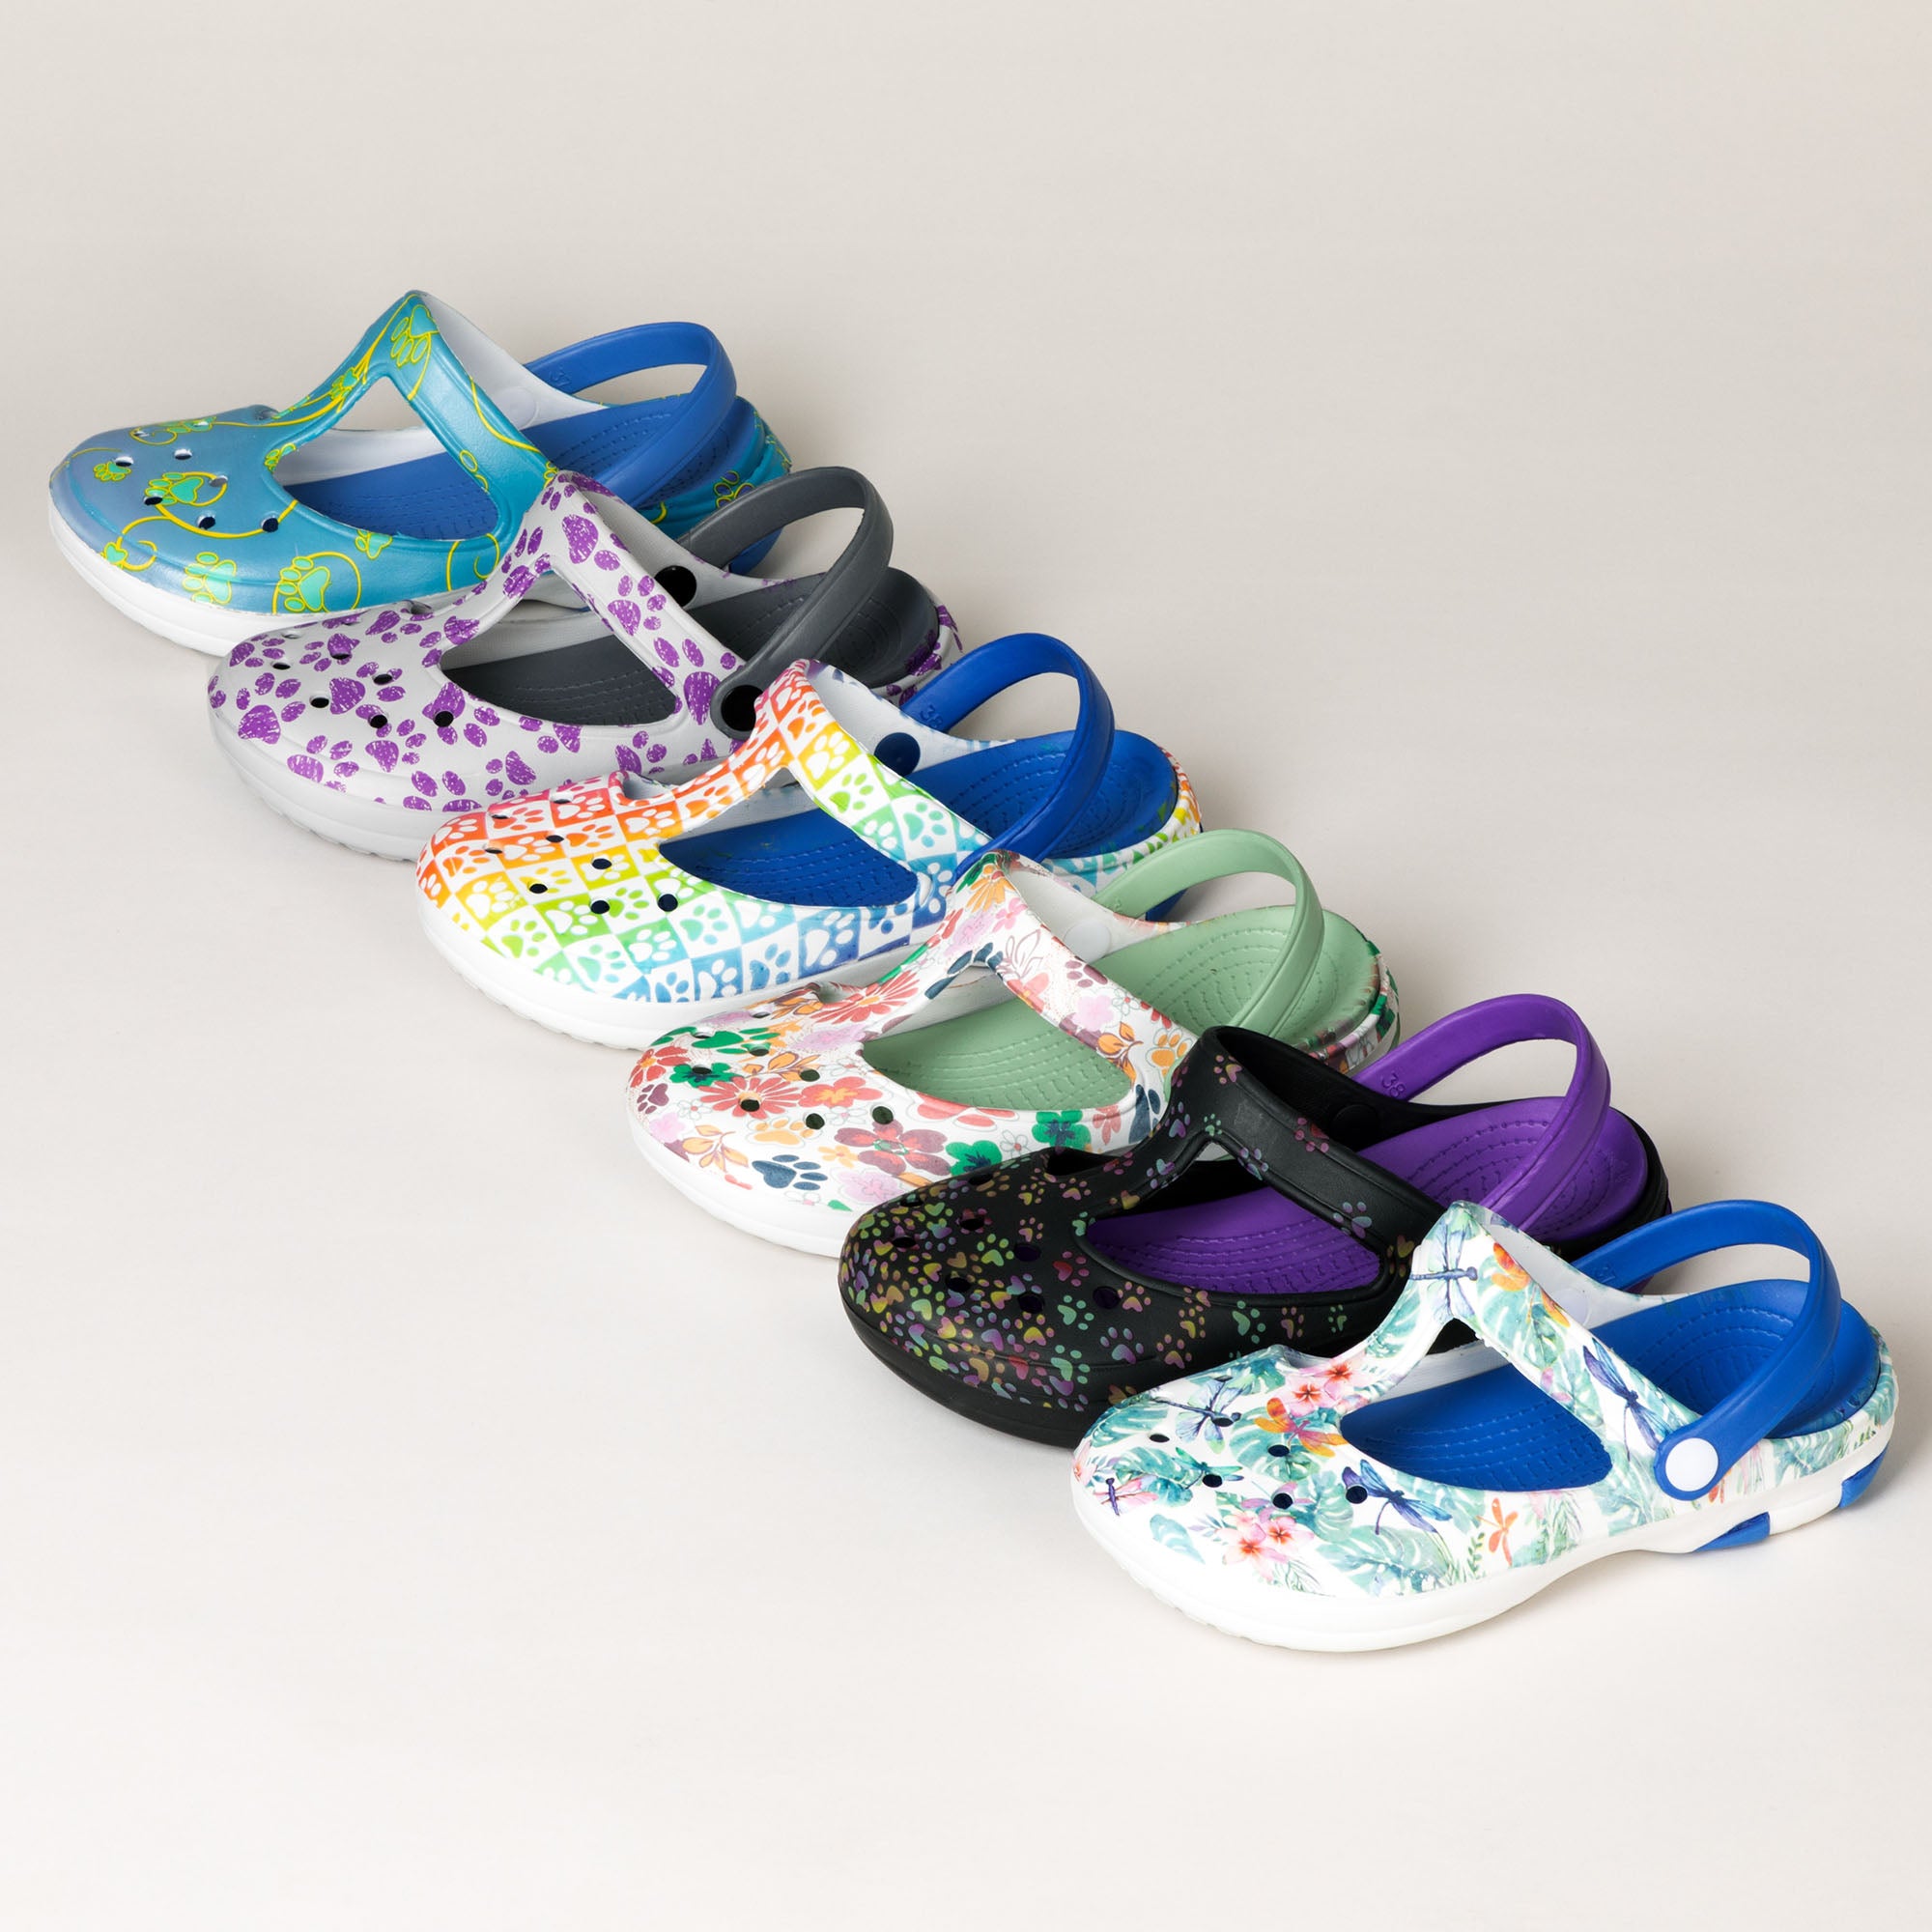 Multicolored Mary Jane Clogs - Flowers & Paws - 8